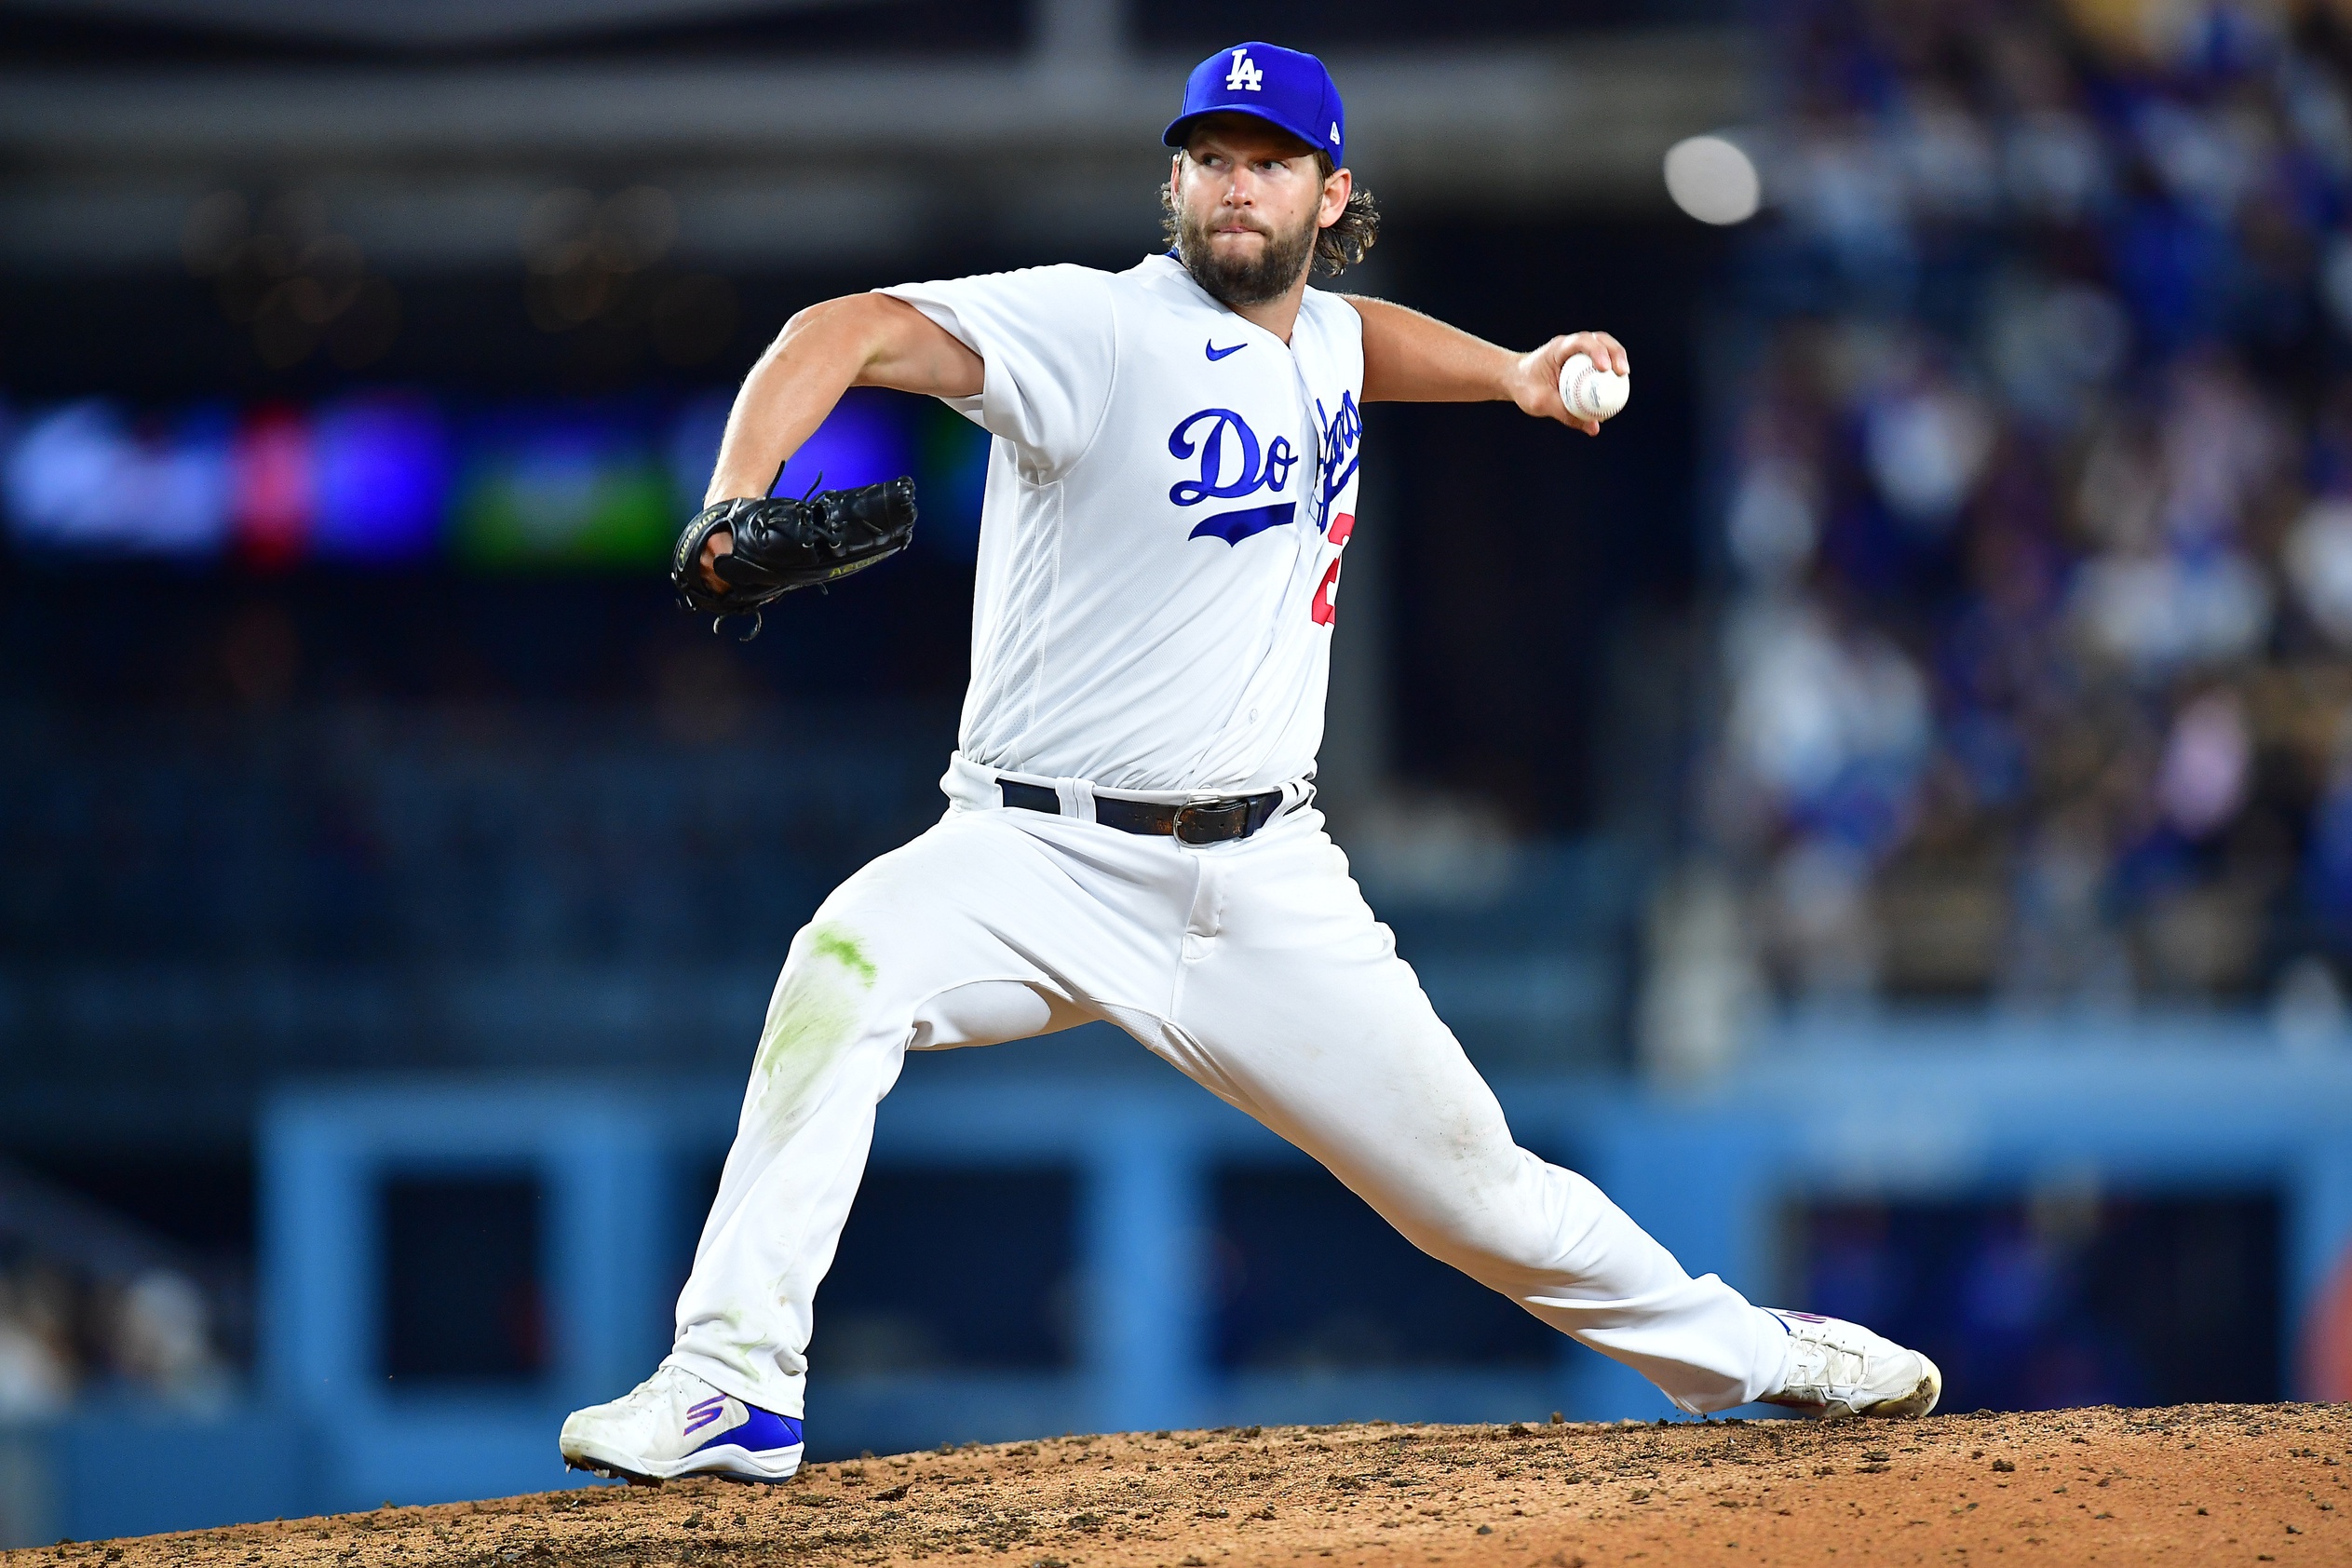 Dodgers pitcher Clayton Kershaw says sore left shoulder will